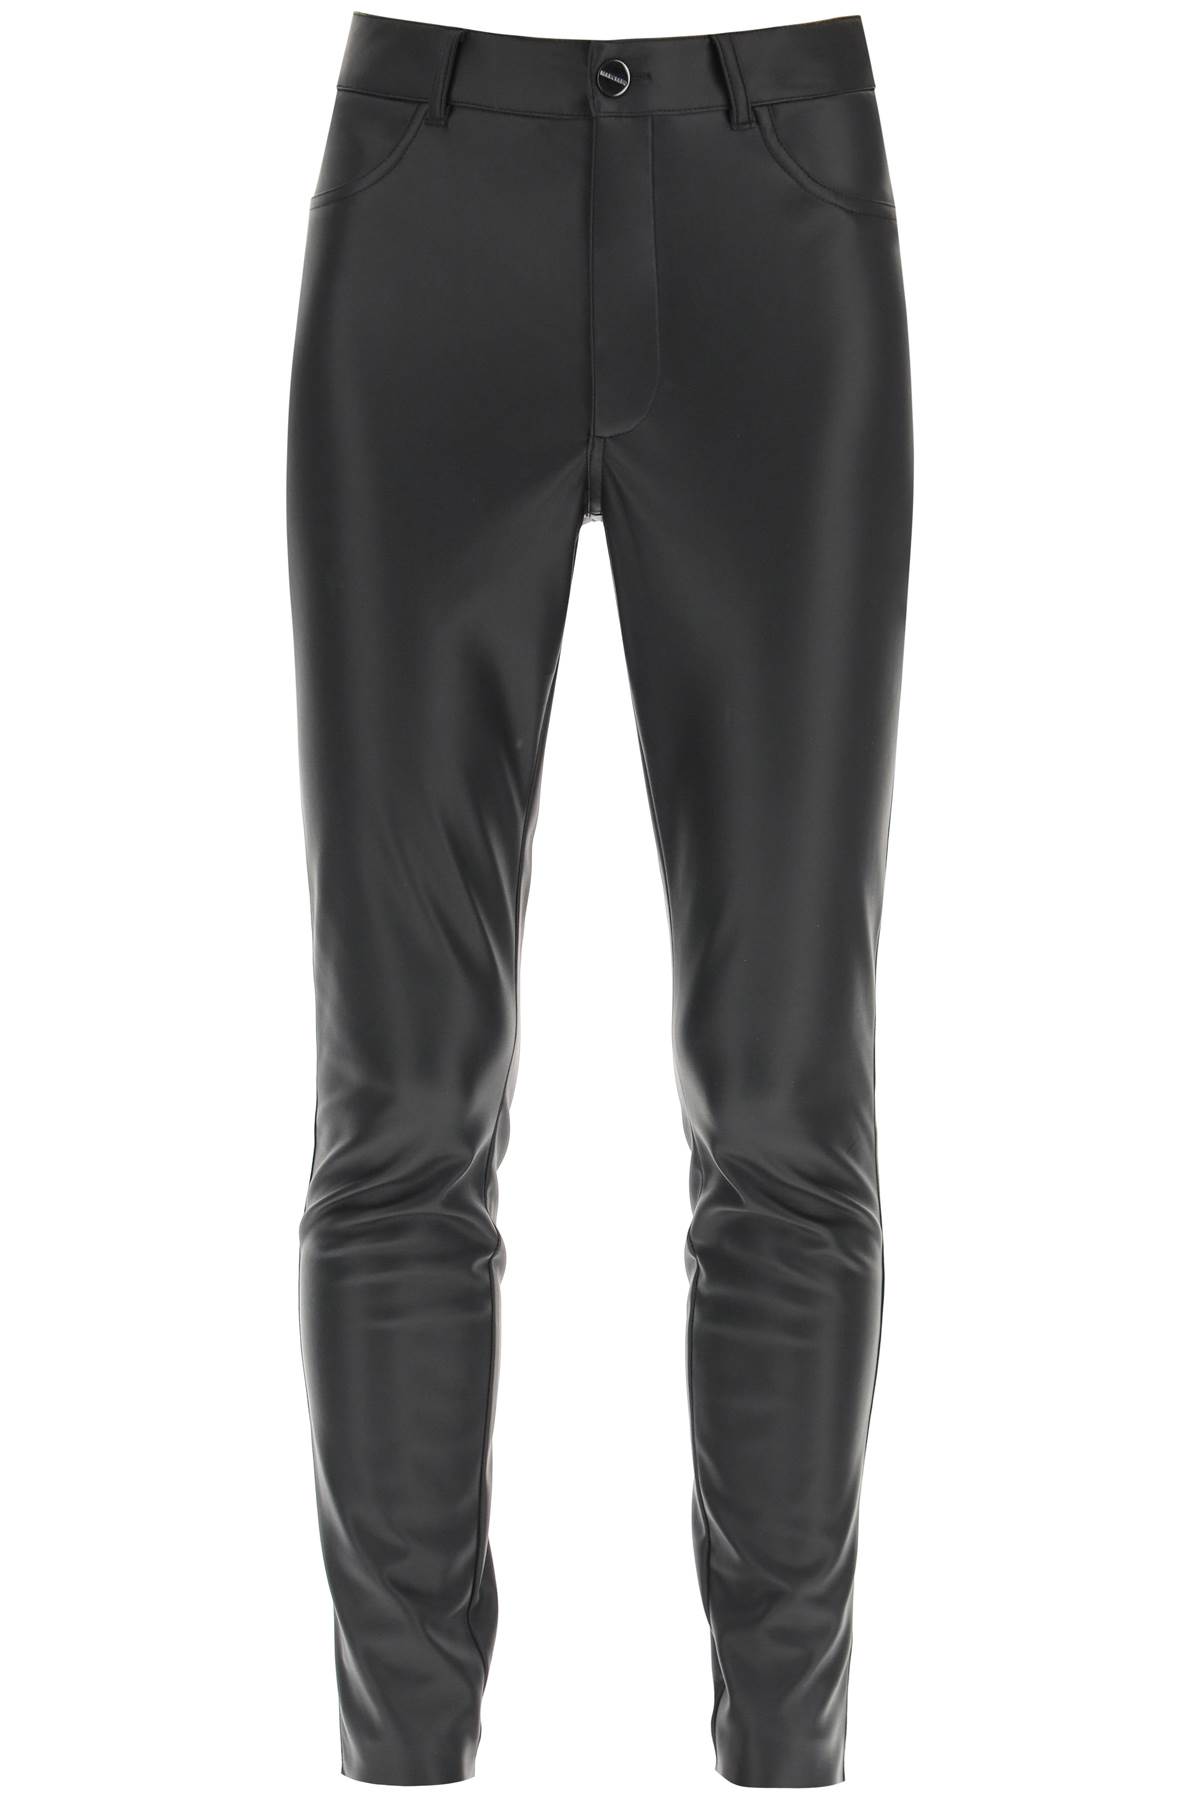 Guess By Marciano Skinny Faux Leather Trousers In Jet Black A996 (black)